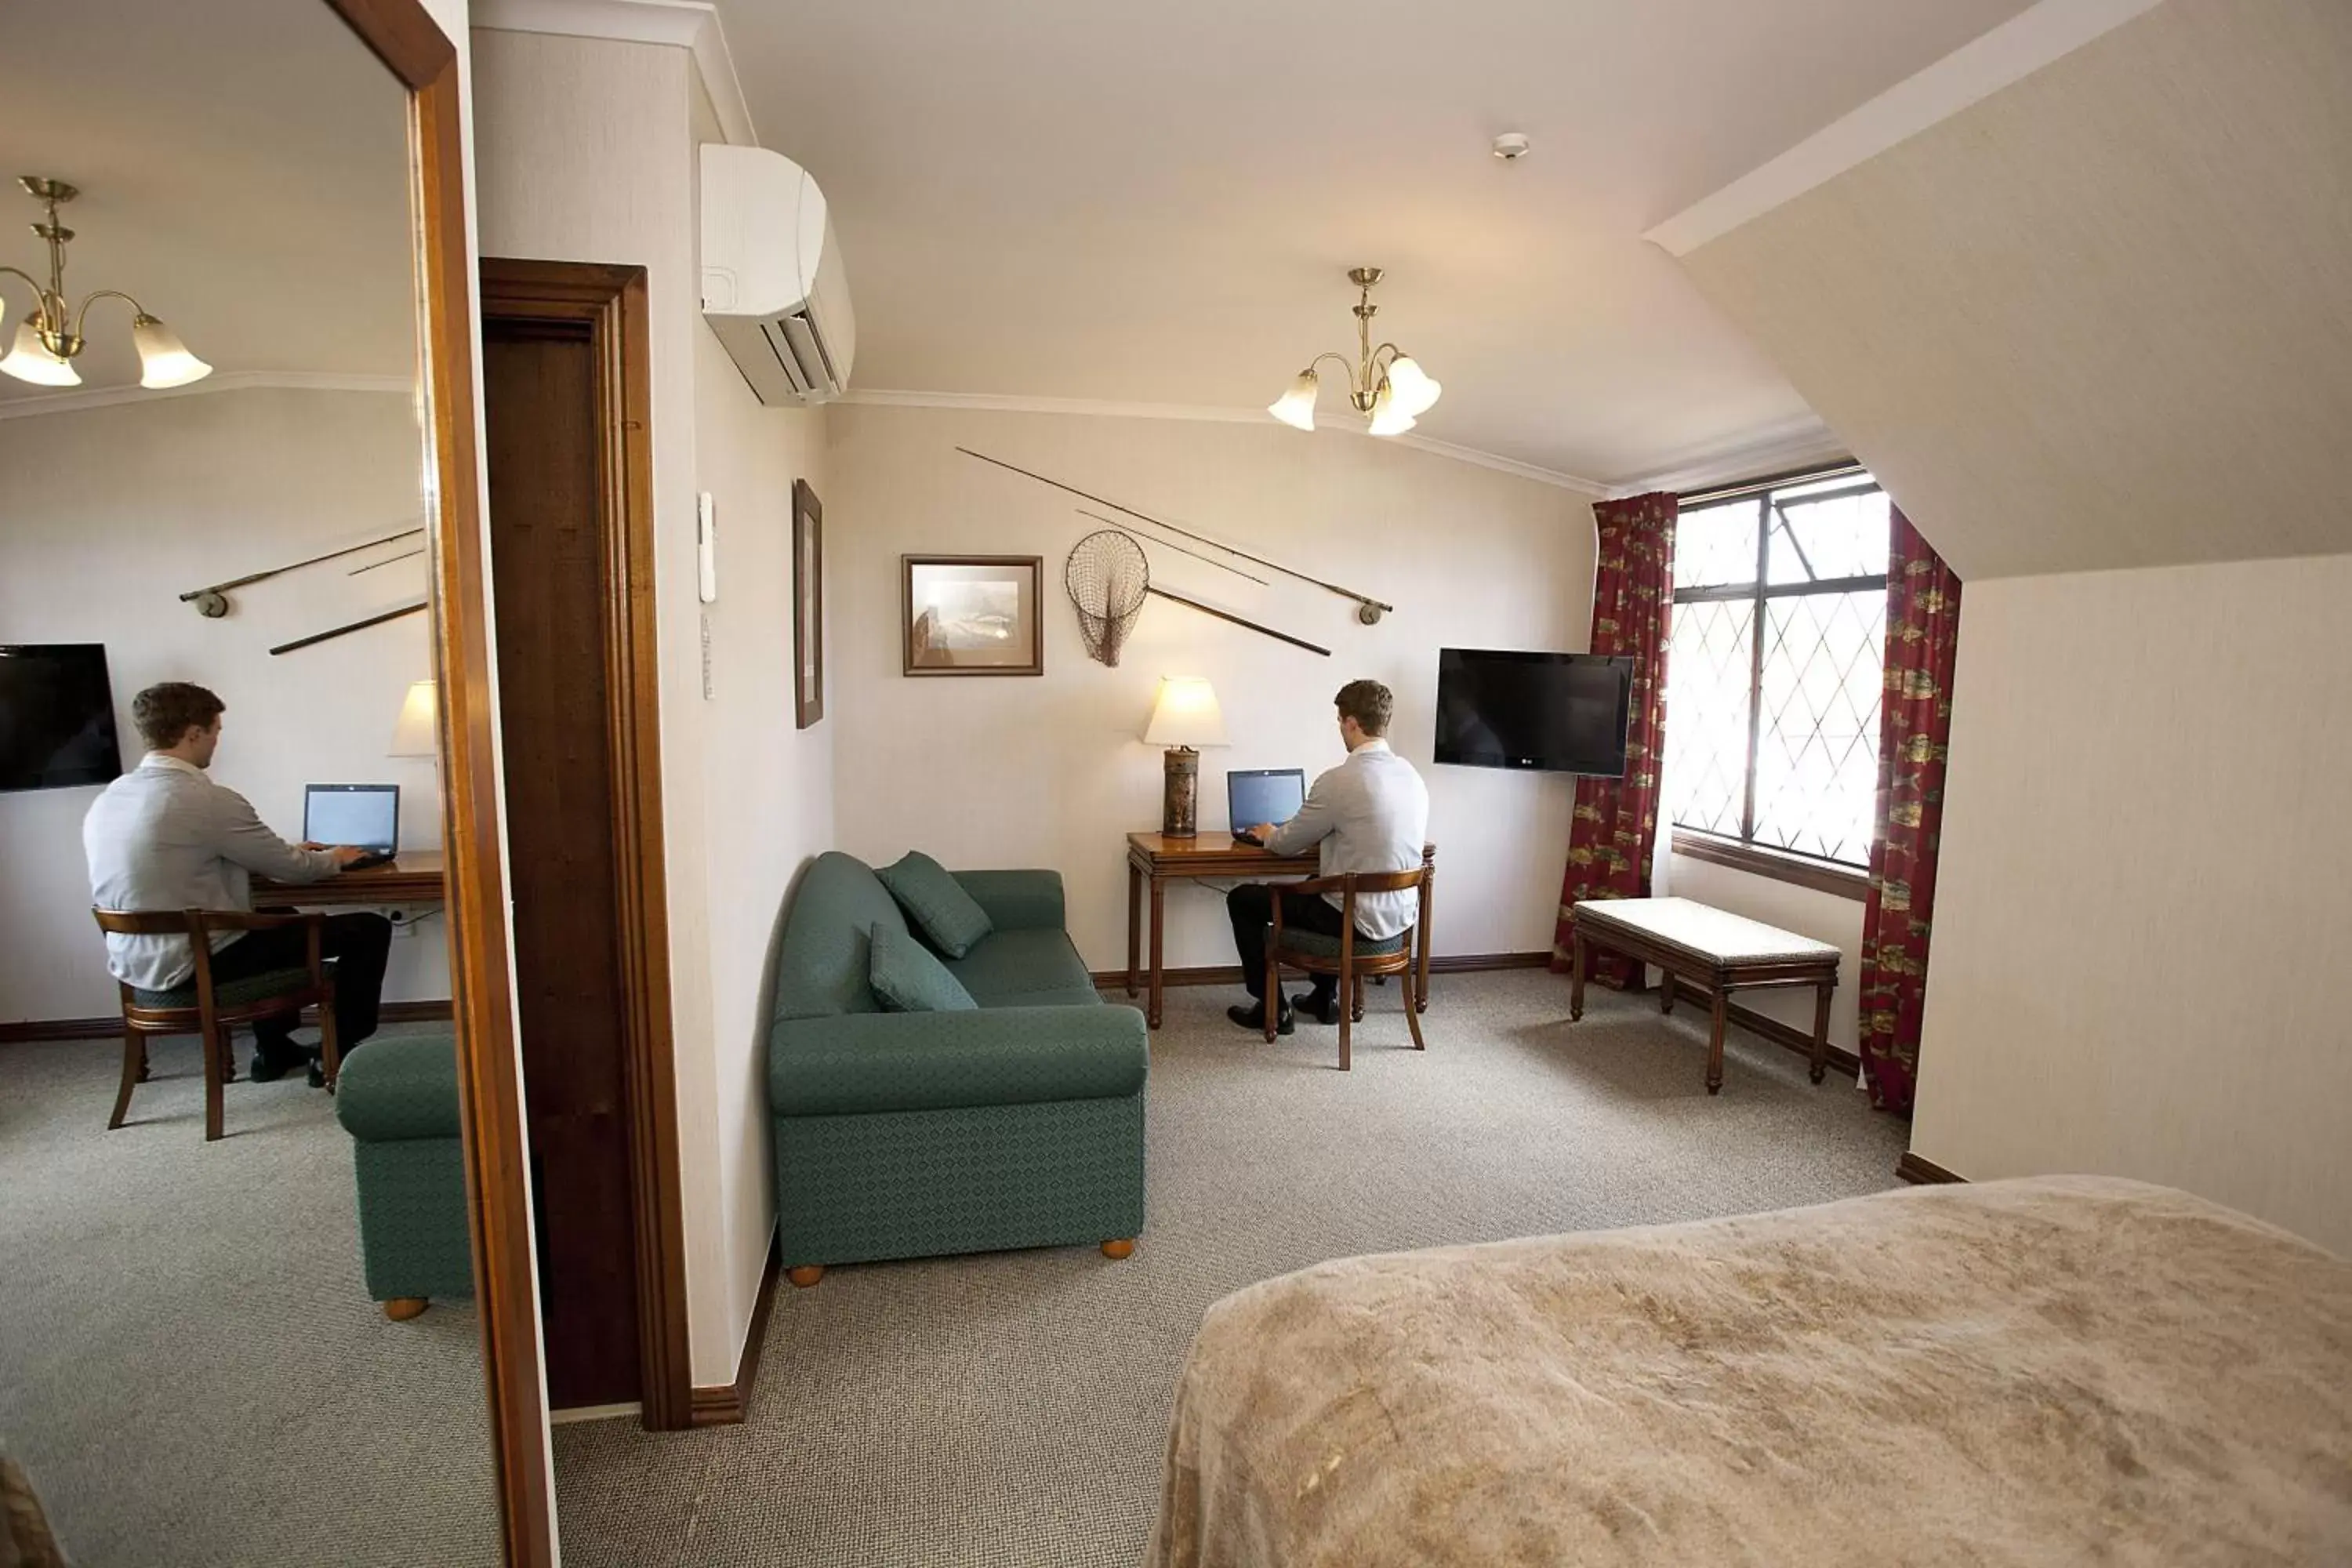 Deluxe Double Room in Distinction Coachman Hotel, Palmerston North